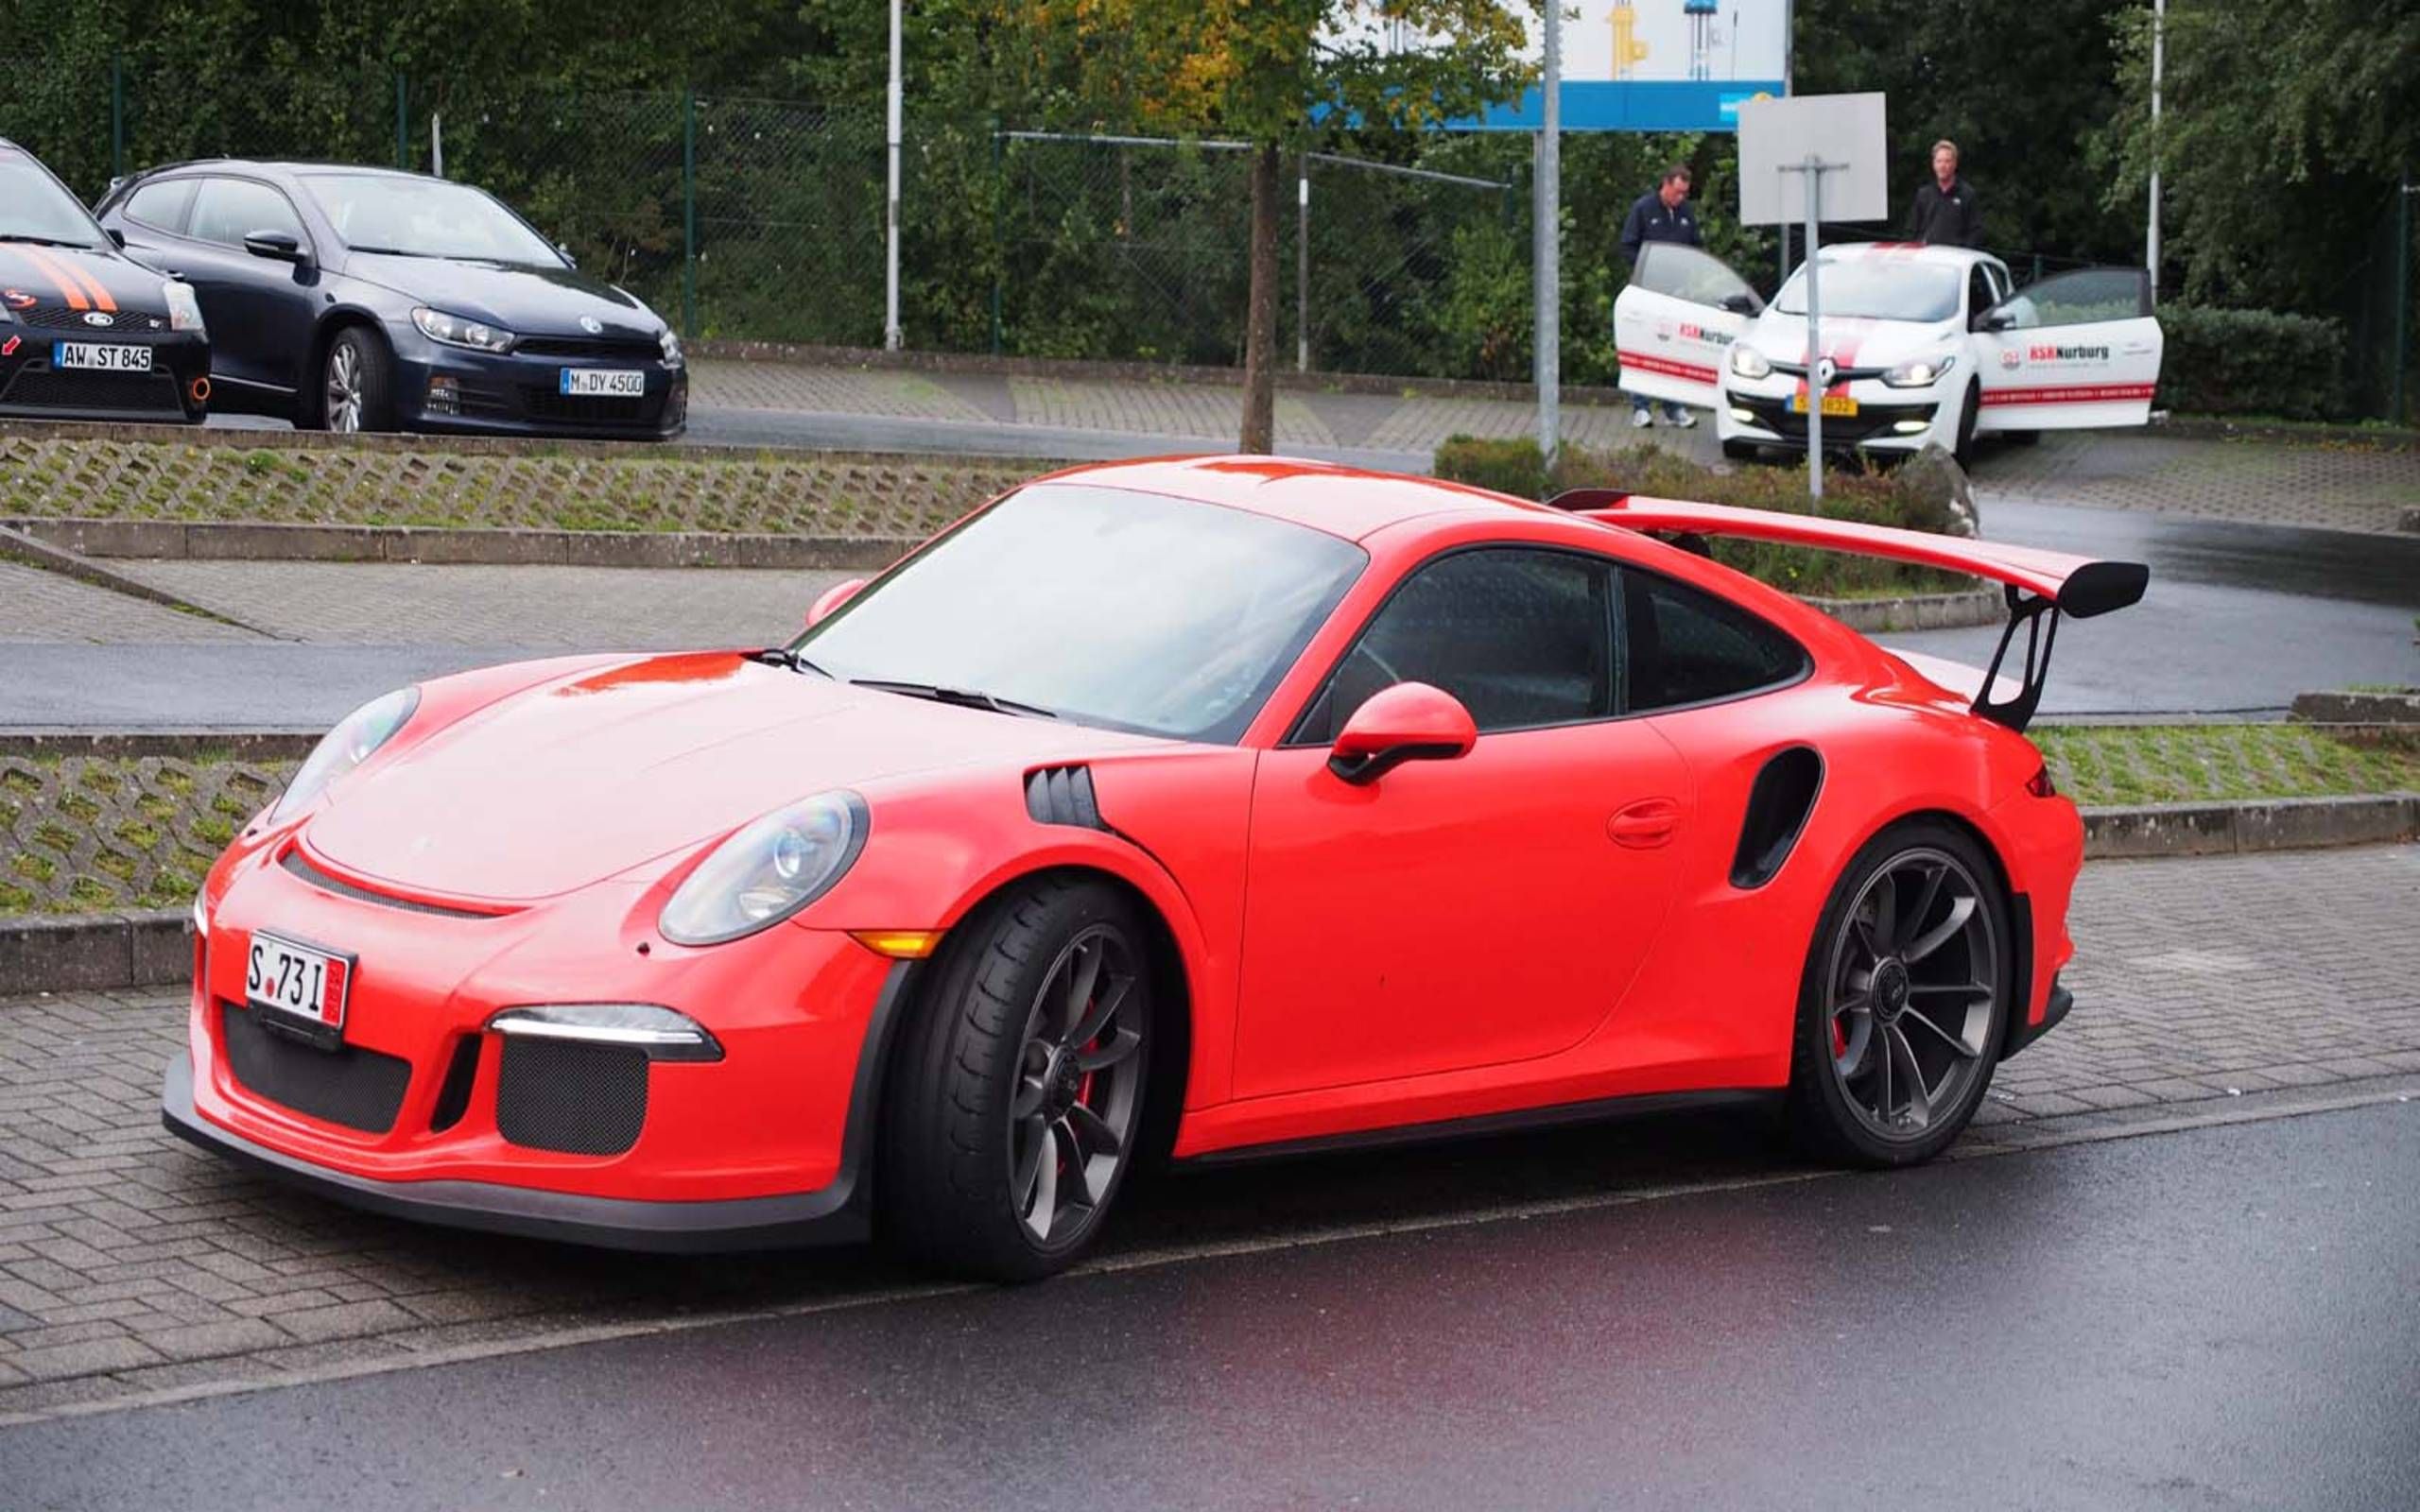 3,000 miles in a 911 GT3 RS